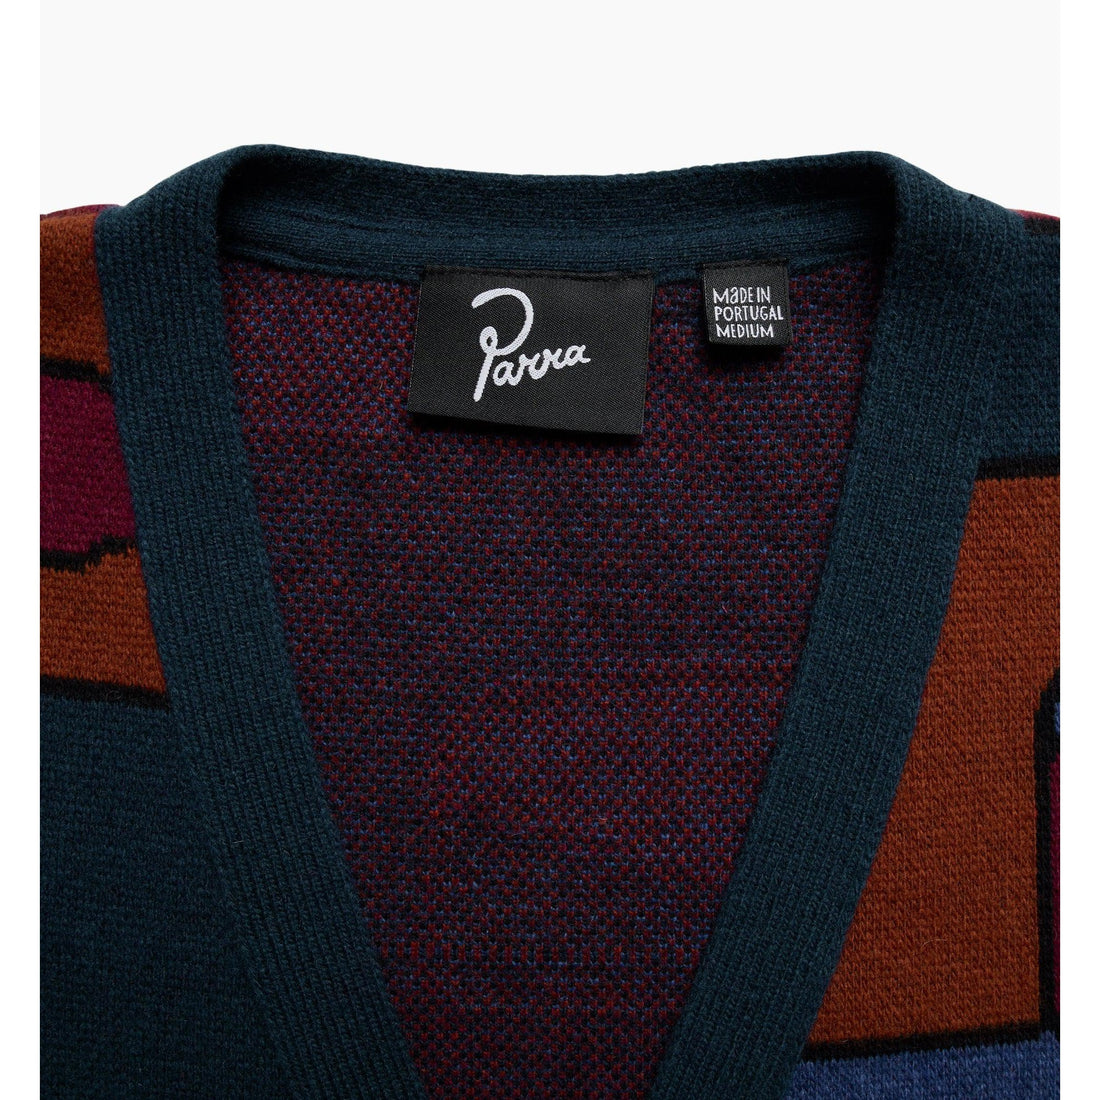 BY PARRA - CANYONS ALL OVER KNITTED CARDIGAN - MULTI